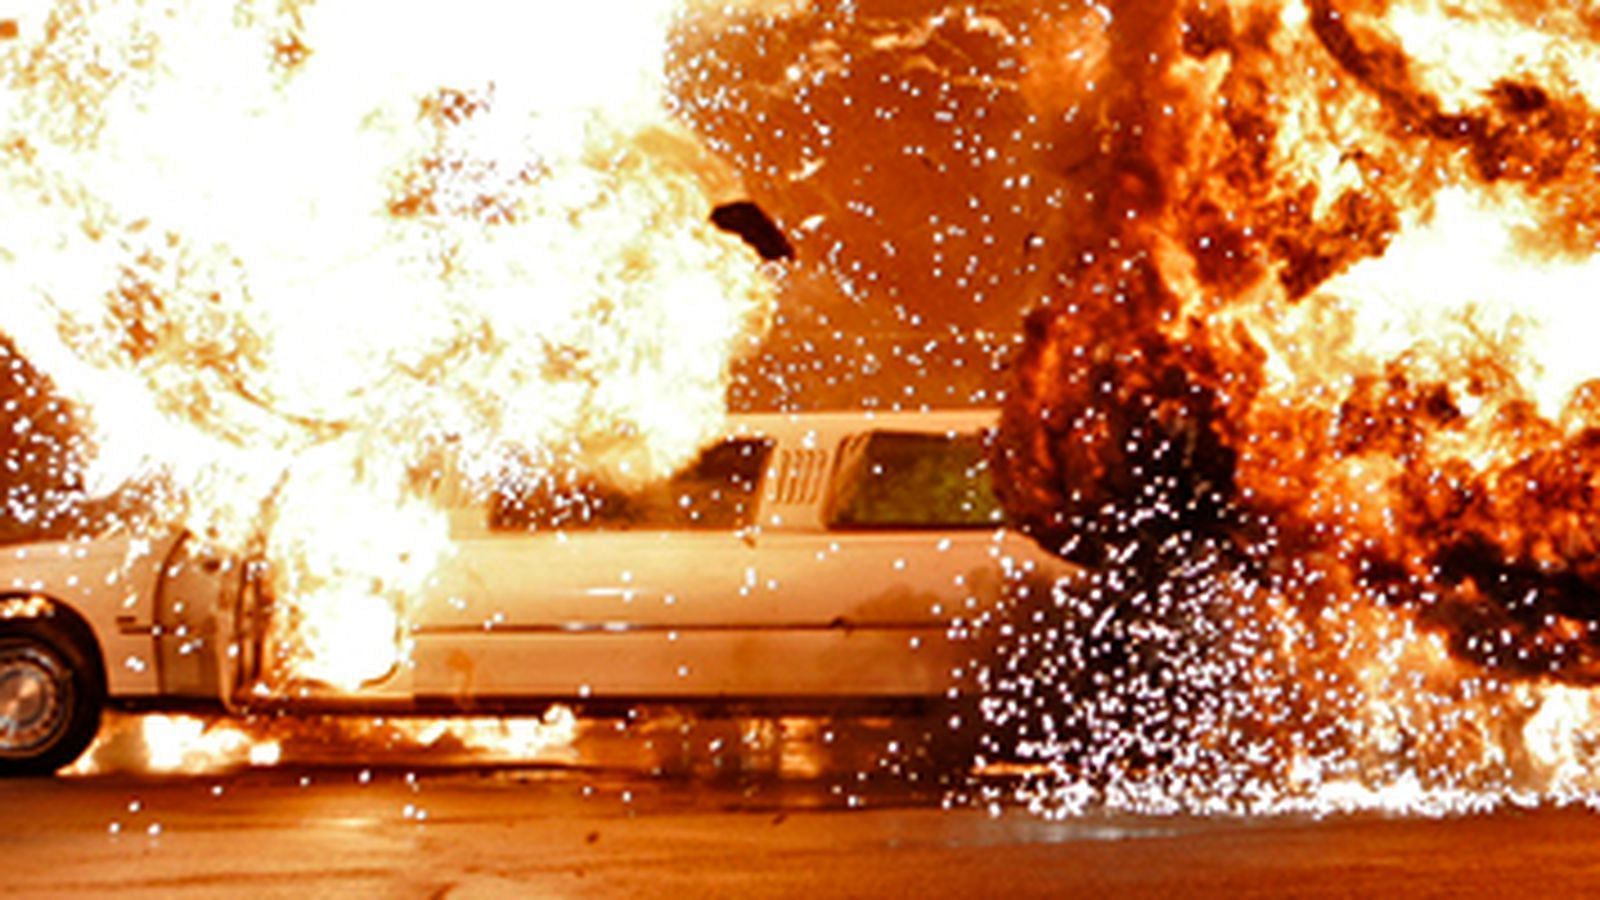 Vince Mcmahon&#039;s limo exploded as a part of the storyline